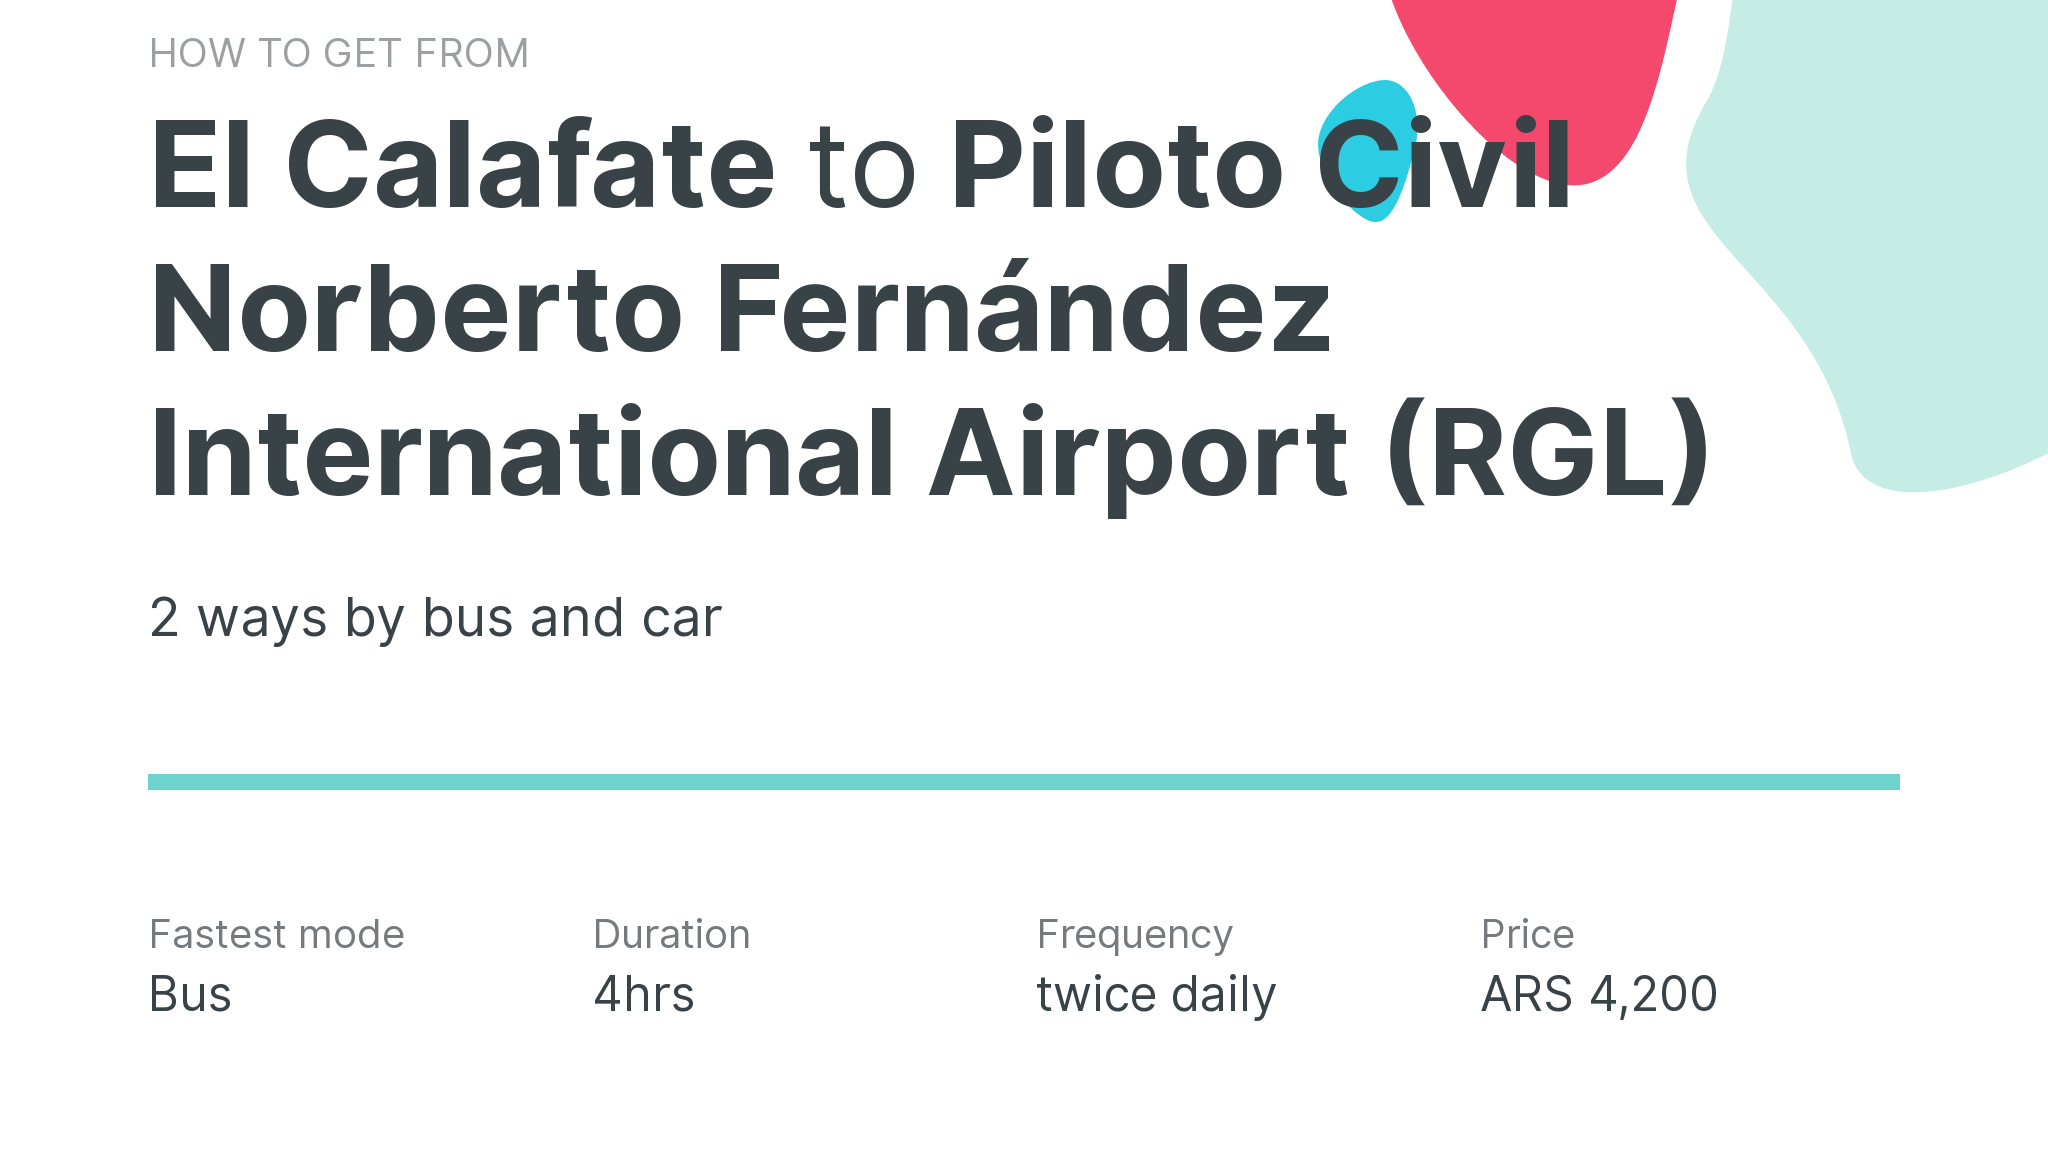 How do I get from El Calafate to Piloto Civil Norberto Fernández International Airport (RGL)